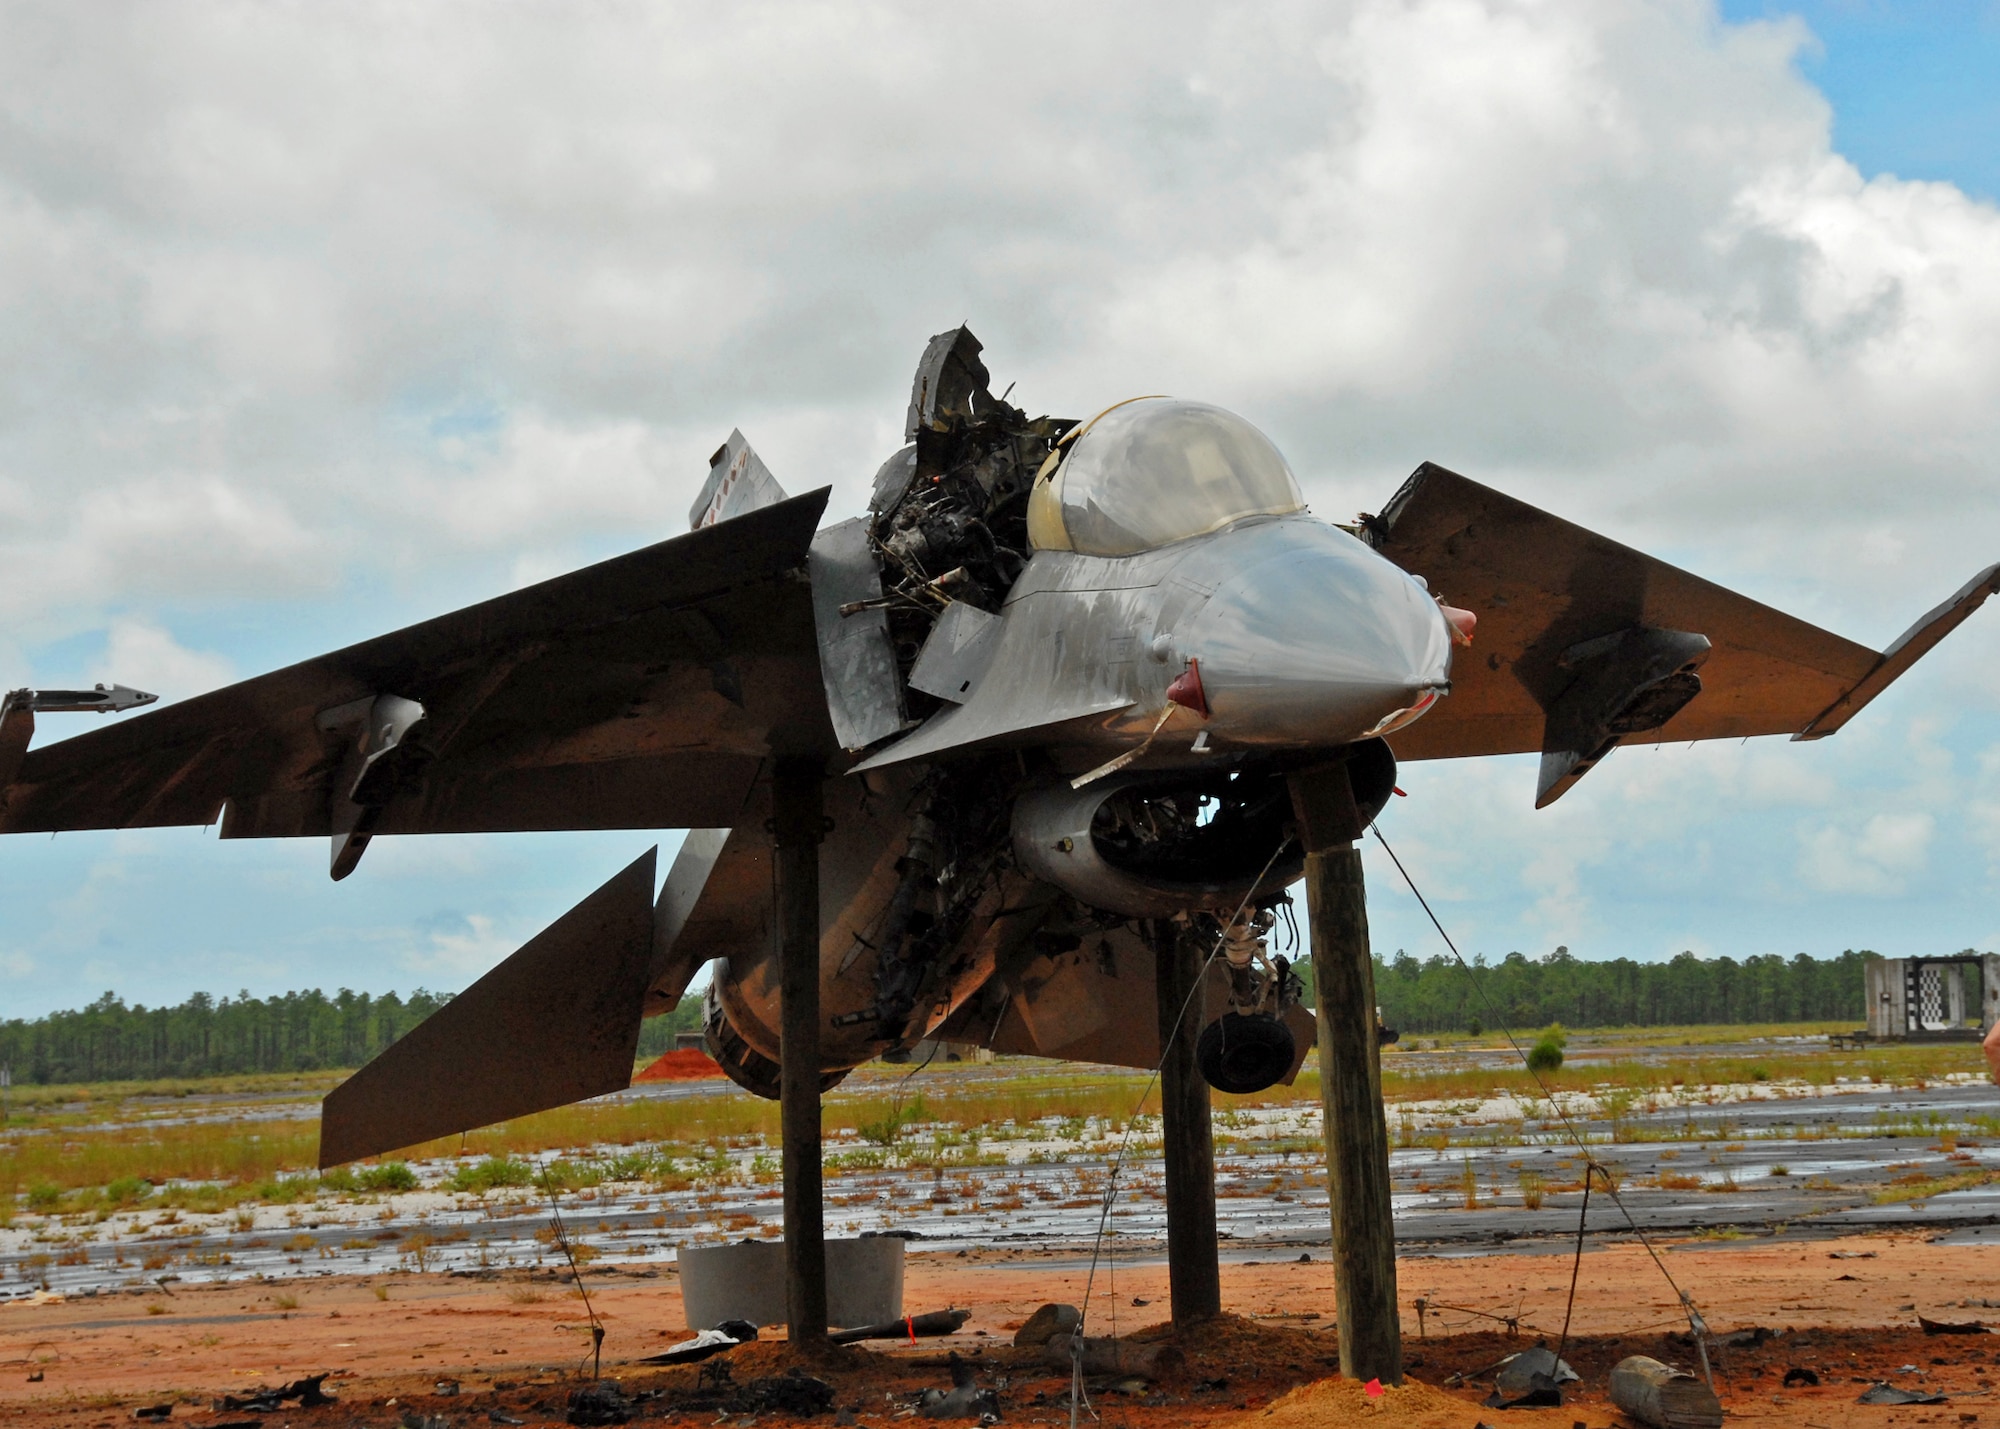 An explosion ripped an F-16 Fighting Falcon into two pieces and scattered debris across the Eglin range Aug. 19.  The explosion was a test of the flight termination system to be used in the QF-16.  The purpose was to demonstrate that the FTS design will be sufficient to immediately terminate the flight of a QF-16, as well as determine a range safety debris footprint.  (U.S. Air Force photo/Samuel King Jr.)